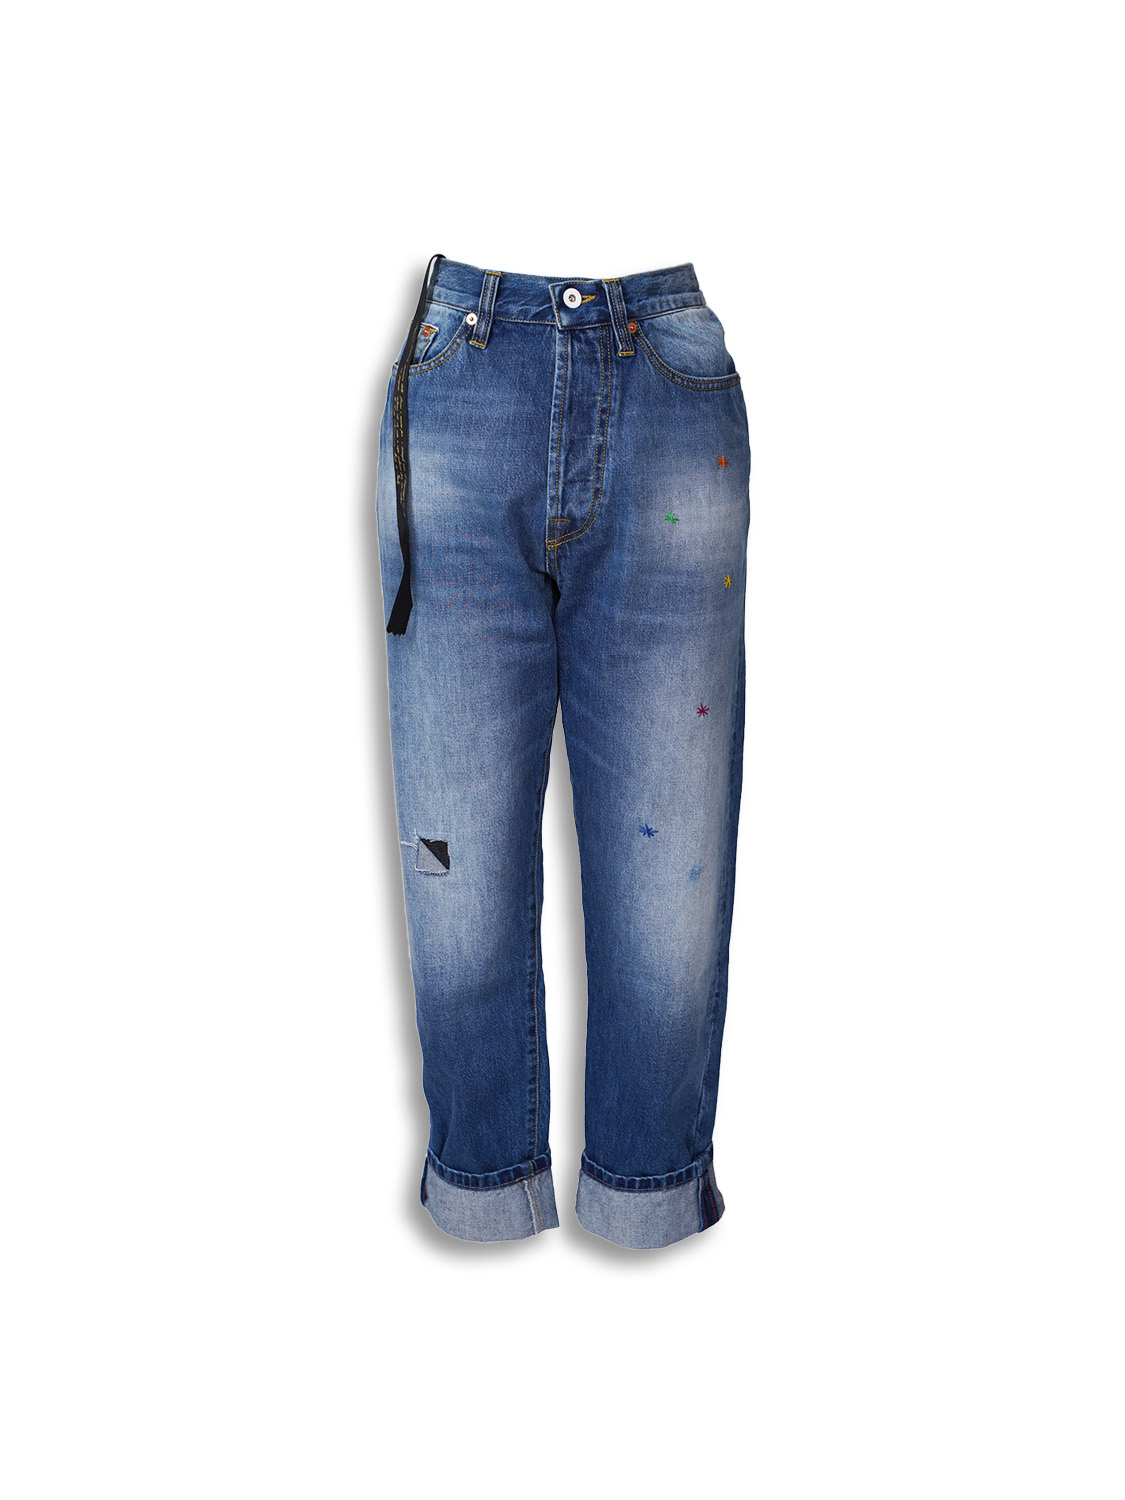 maurizio massimino Jose - denim jeans with patch patches blue 48